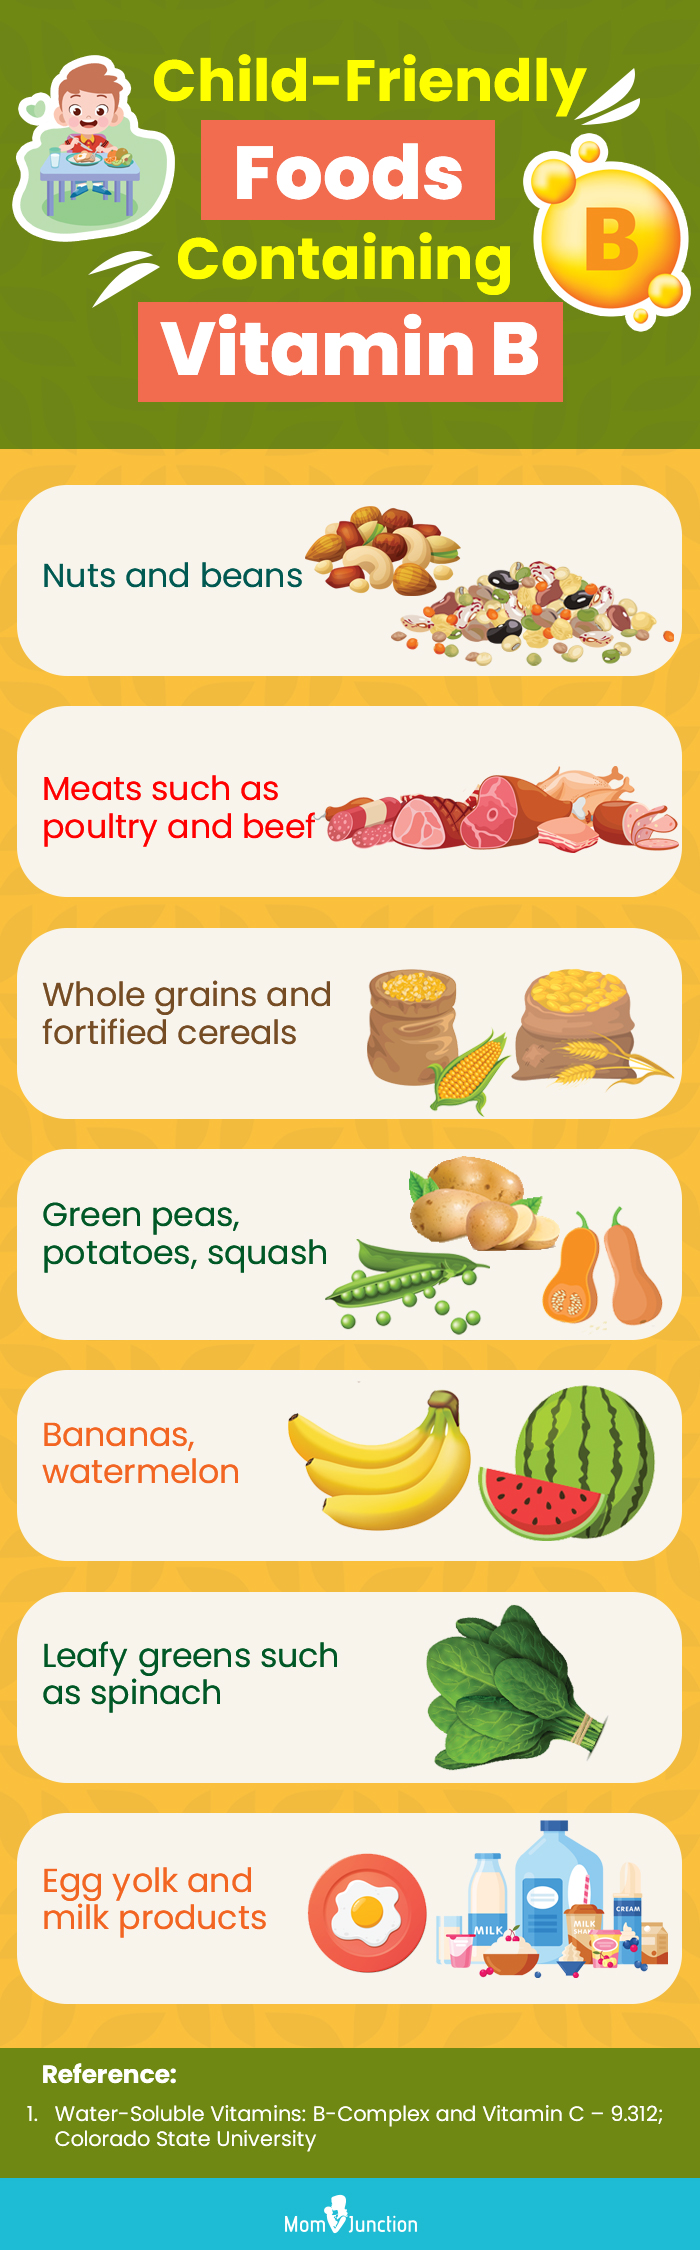 child friendly foods containing vitamin b (infographic)